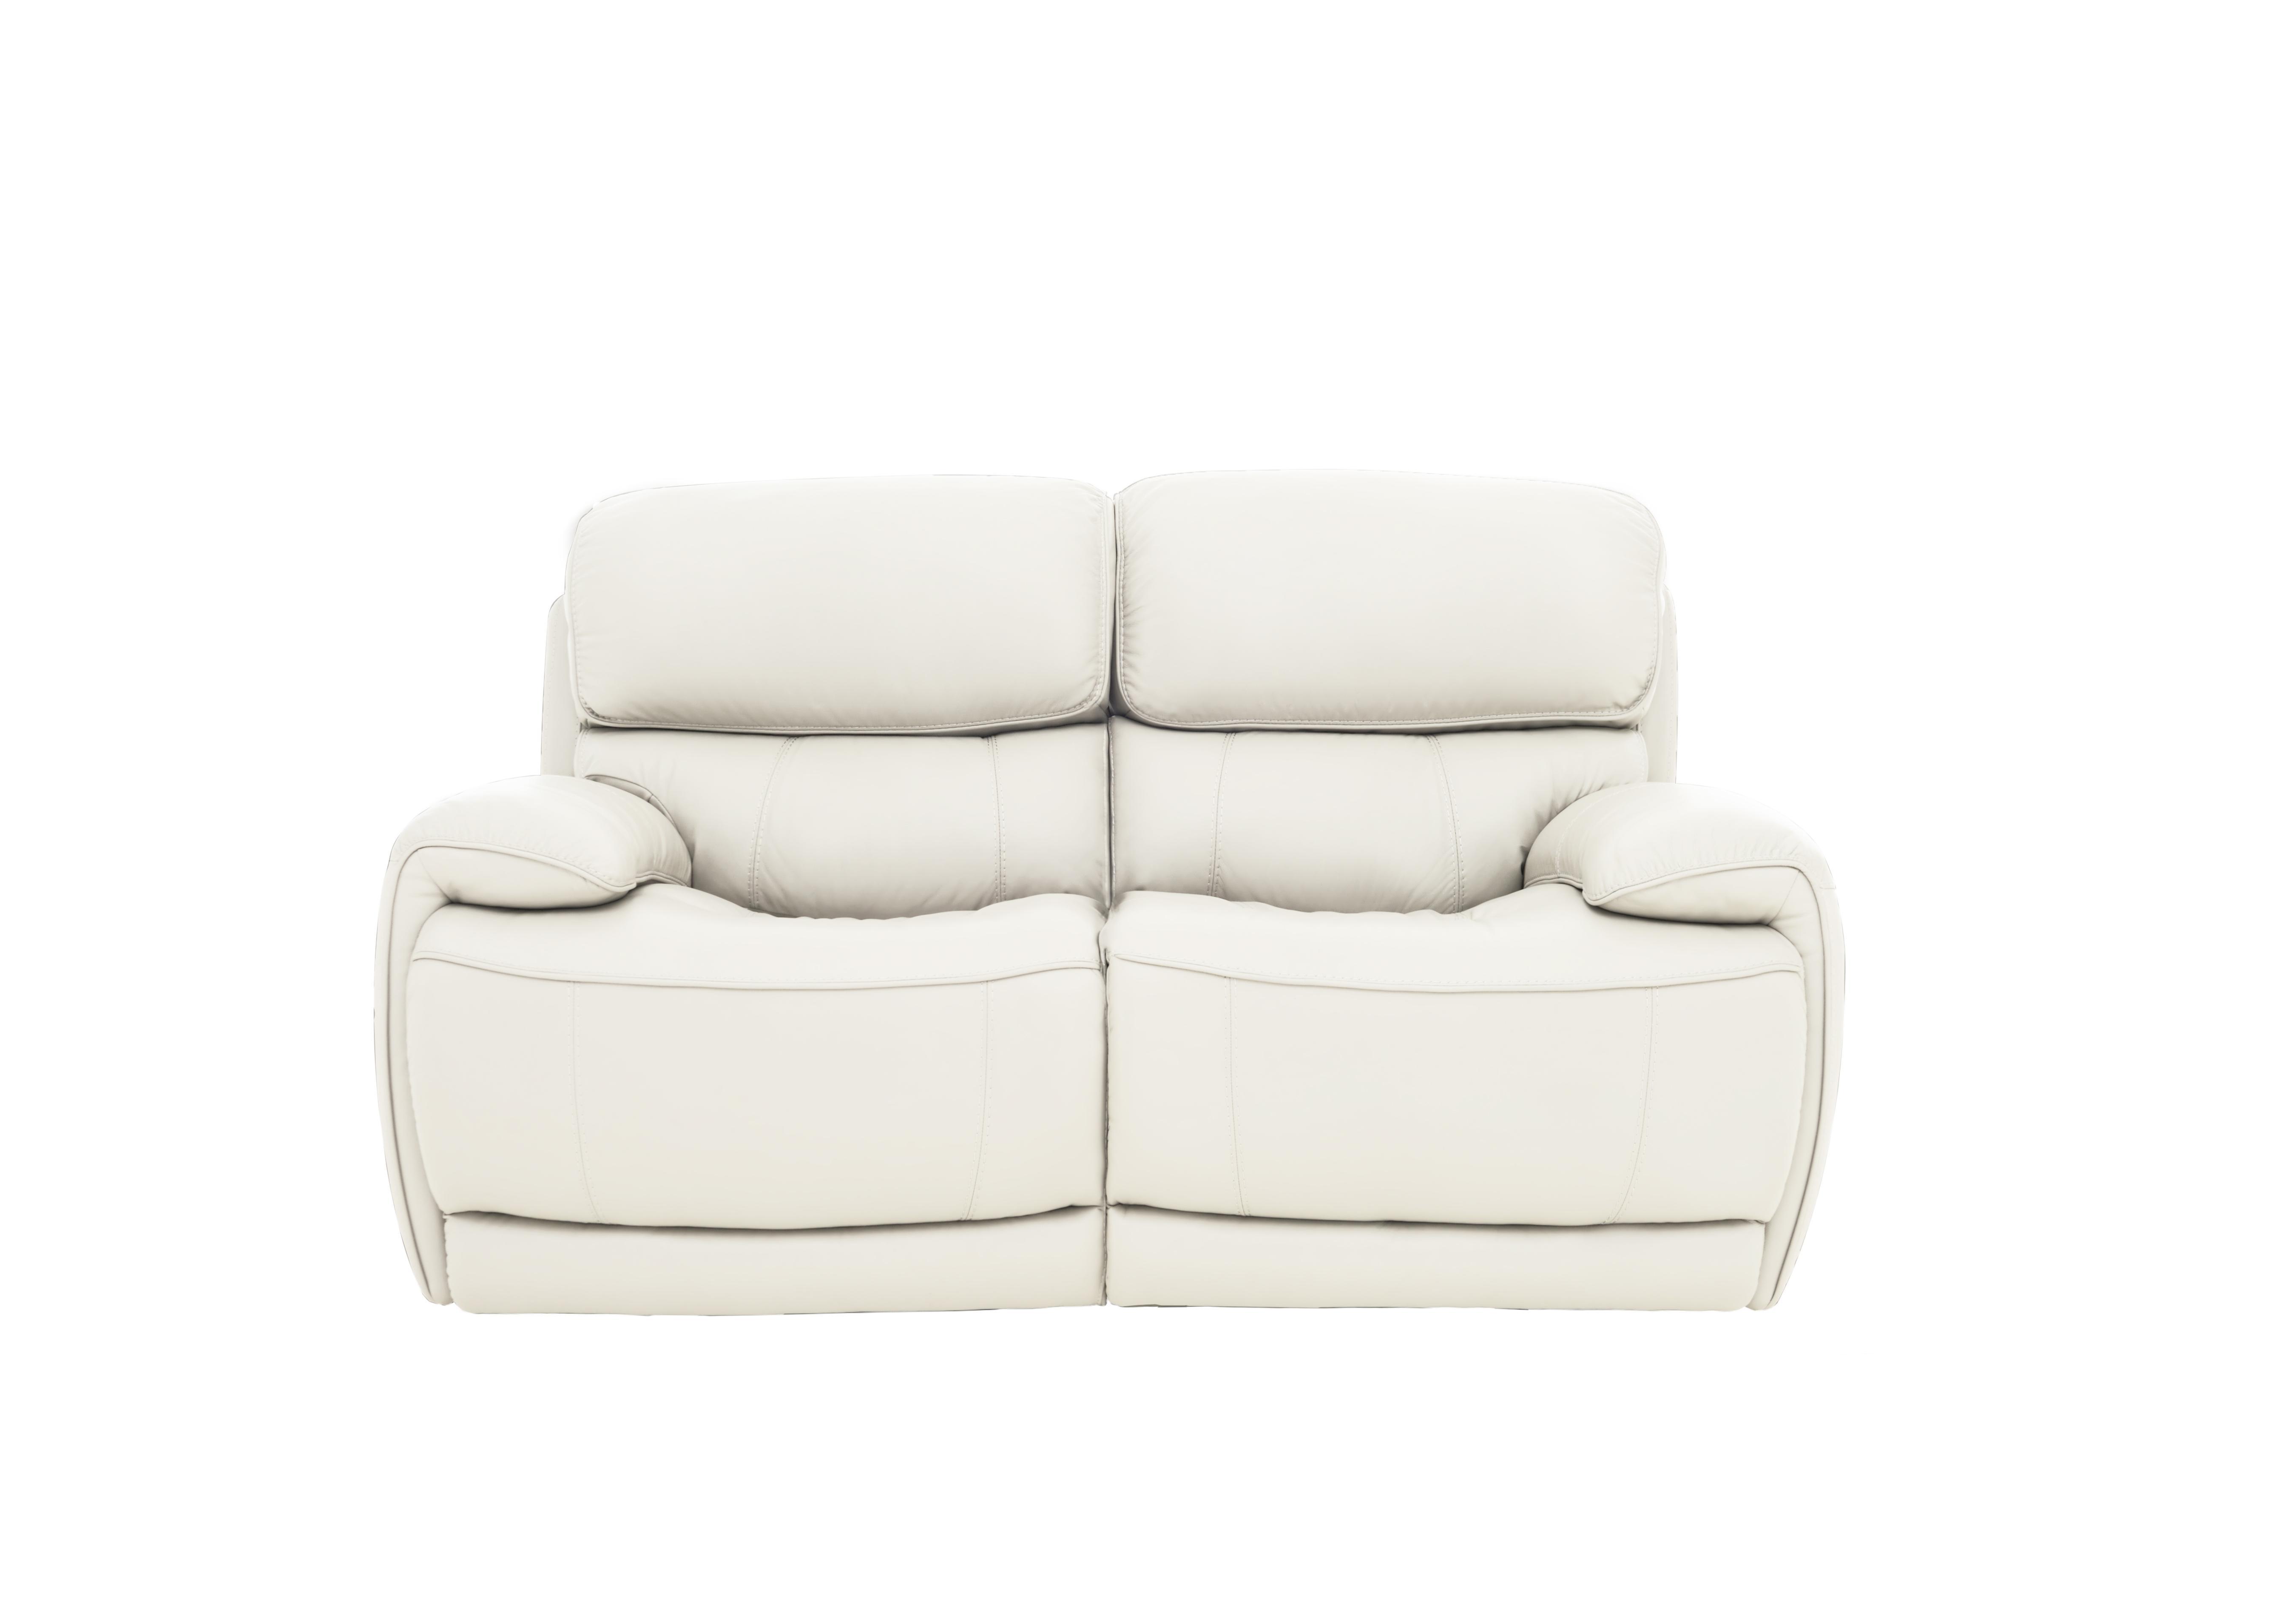 Rocco 2 Seater Leather Power Rocker Sofa with Power Headrests in Bv-744d Star White on Furniture Village